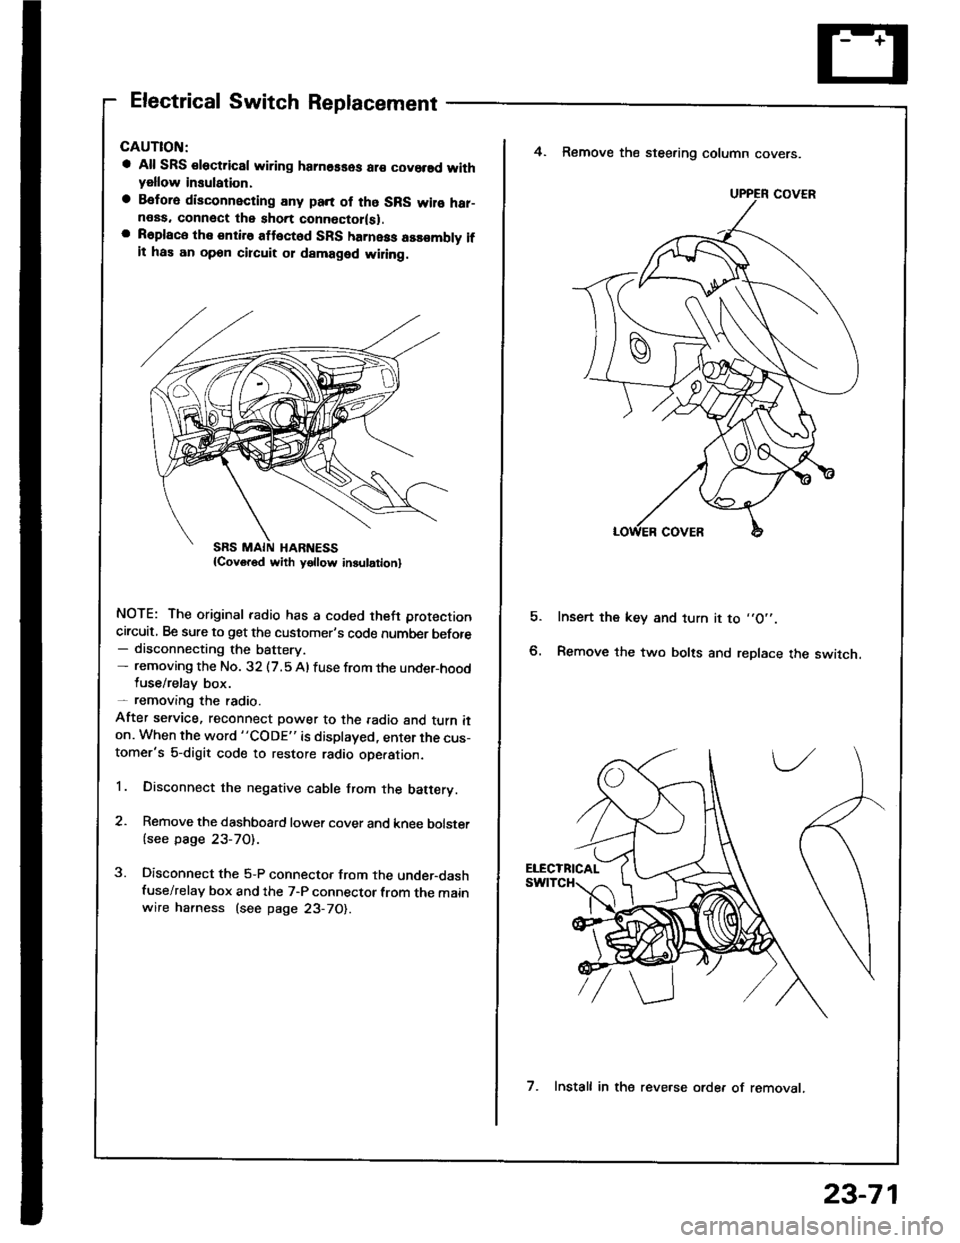 ACURA INTEGRA 1994  Service Repair Manual Electrical Switch Replacement
a All SRS €lectric8l wiring hamosses ar€ covorsd withyellow insulation,
a Befora disconnecting any pan of tho SRS wilo har-neas. connect the short connoctor(sl.a R6pl